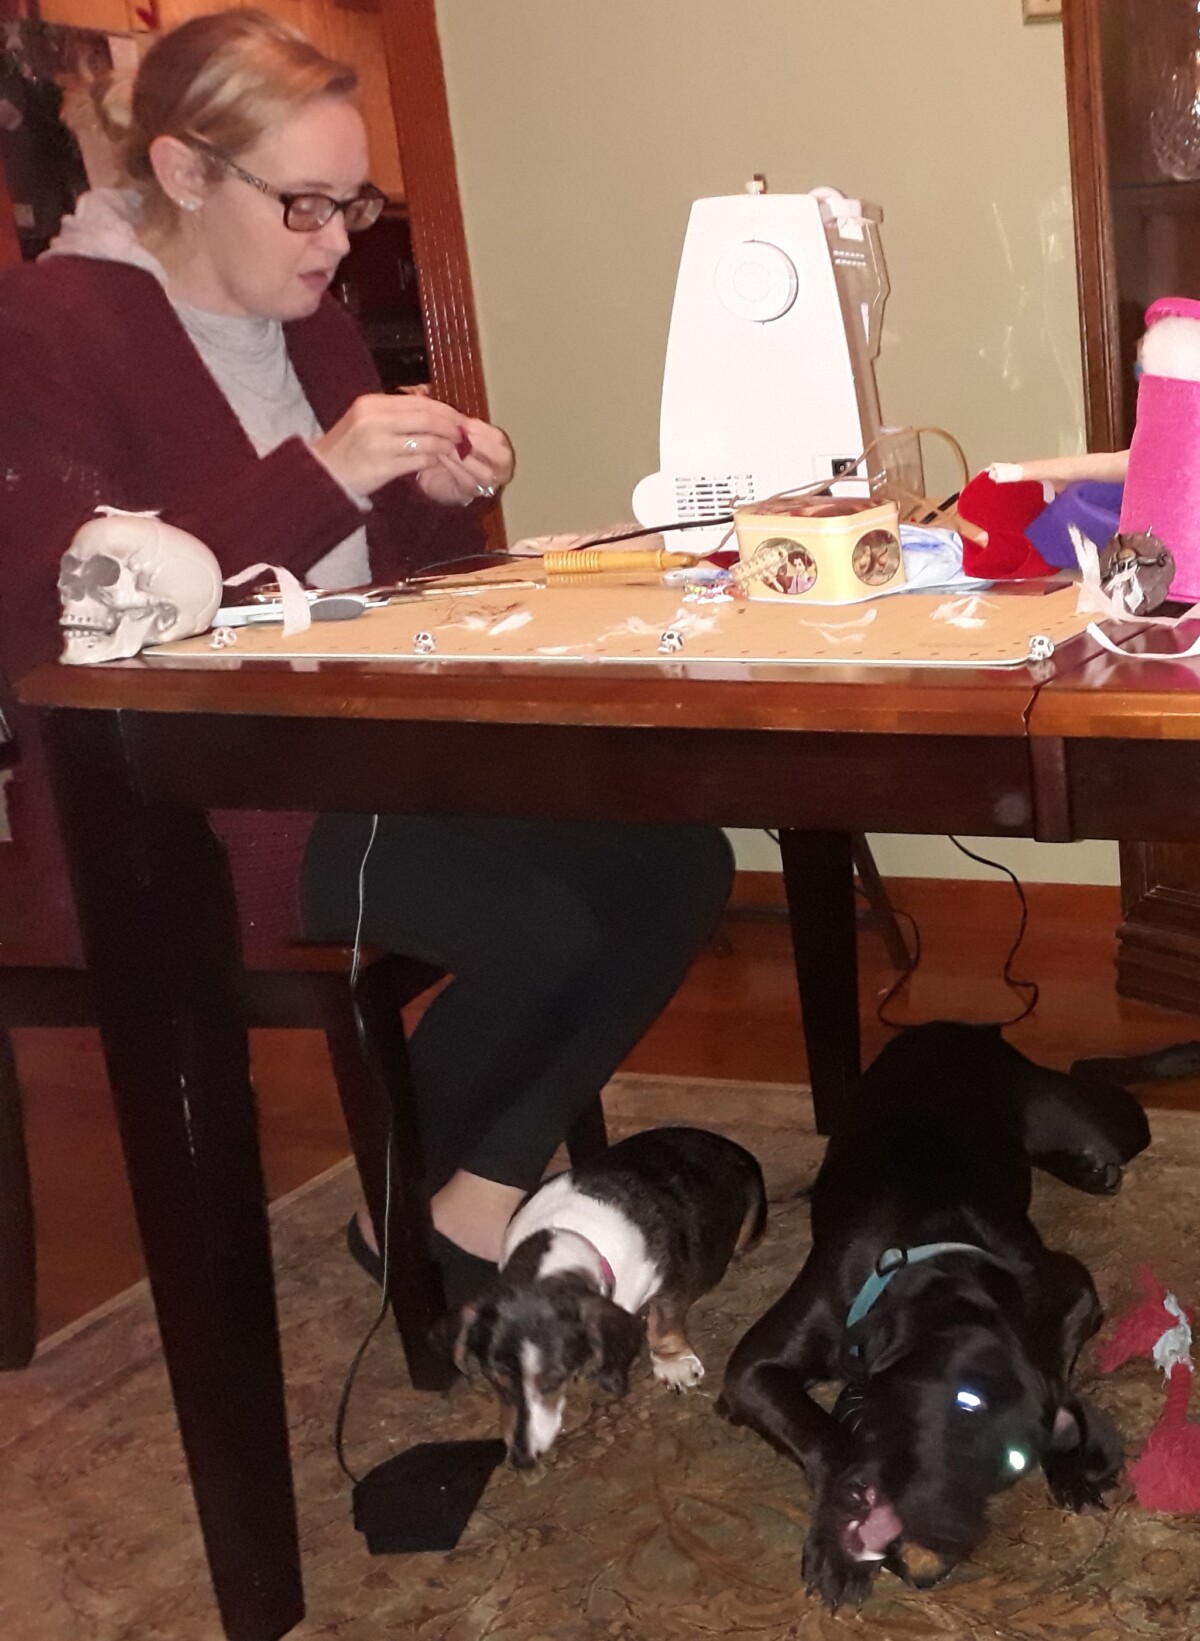 Christina doing Halloween crafting with the dogs under foot. They are always hanging out.